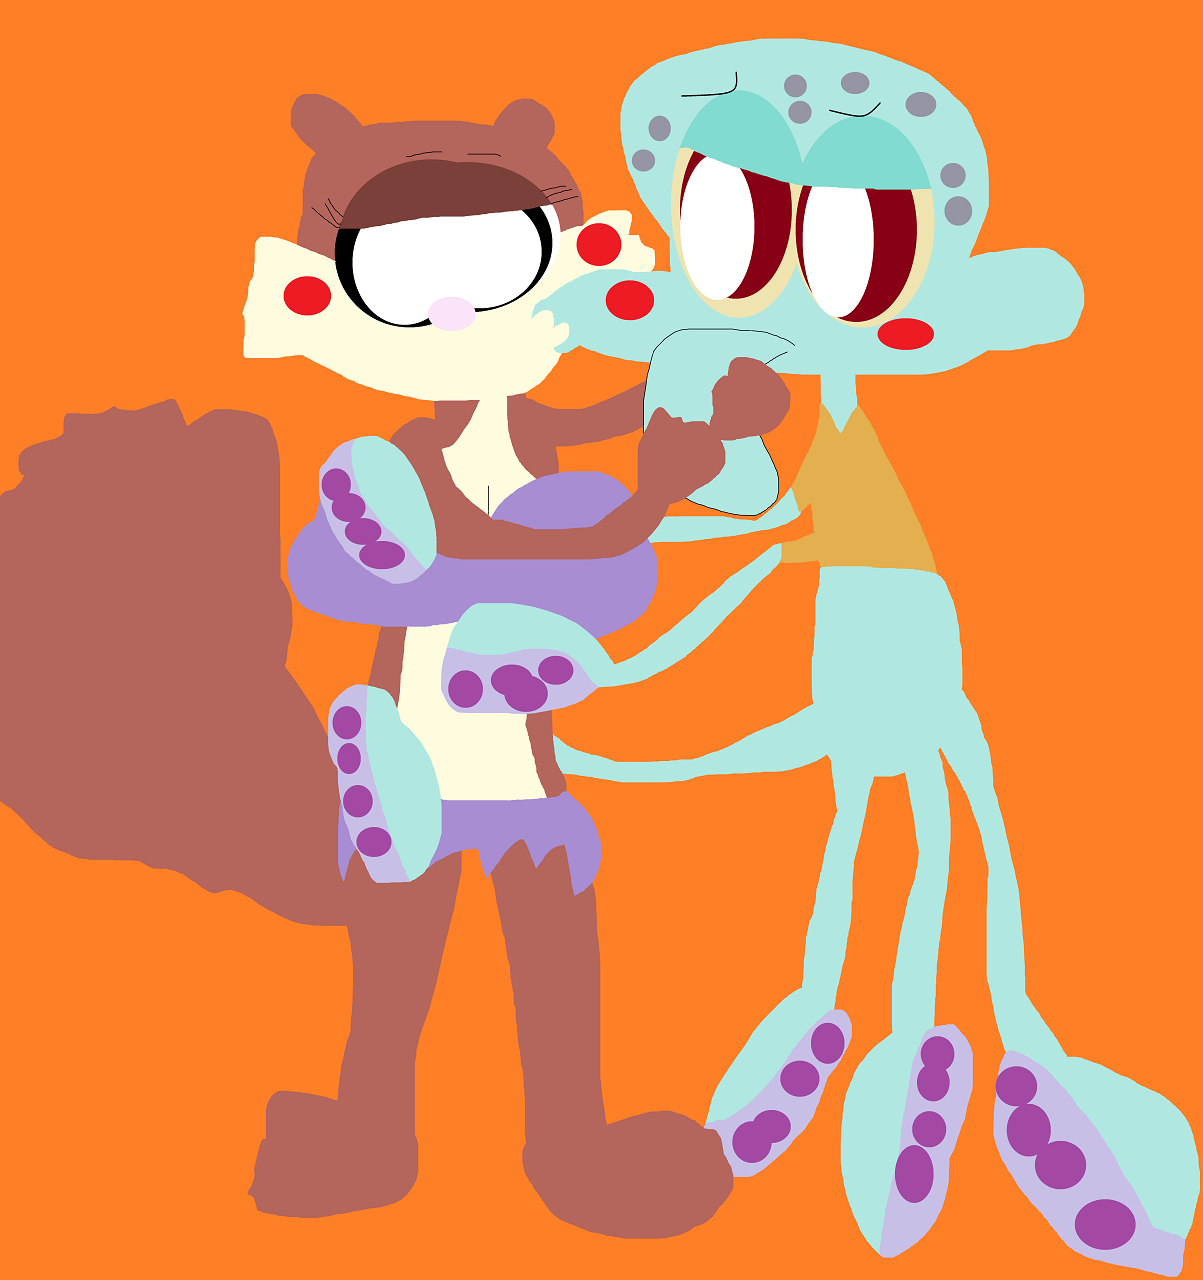 Squidward And Sandy Kissing And Holding Each Other by Falconlobo